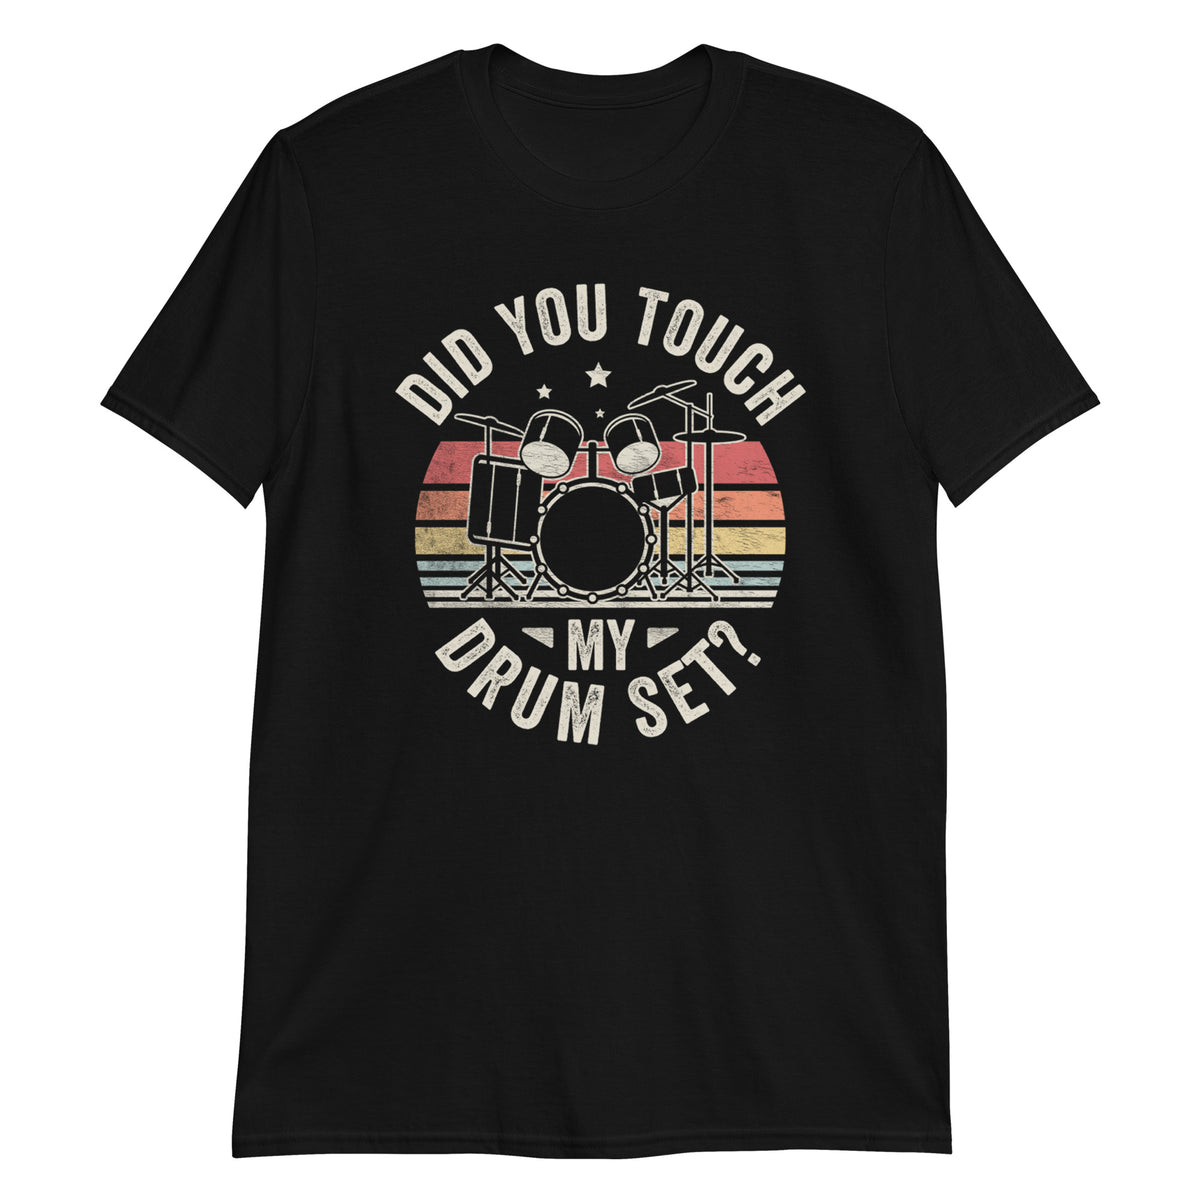 Did You Touch Drum Set T-Shirt